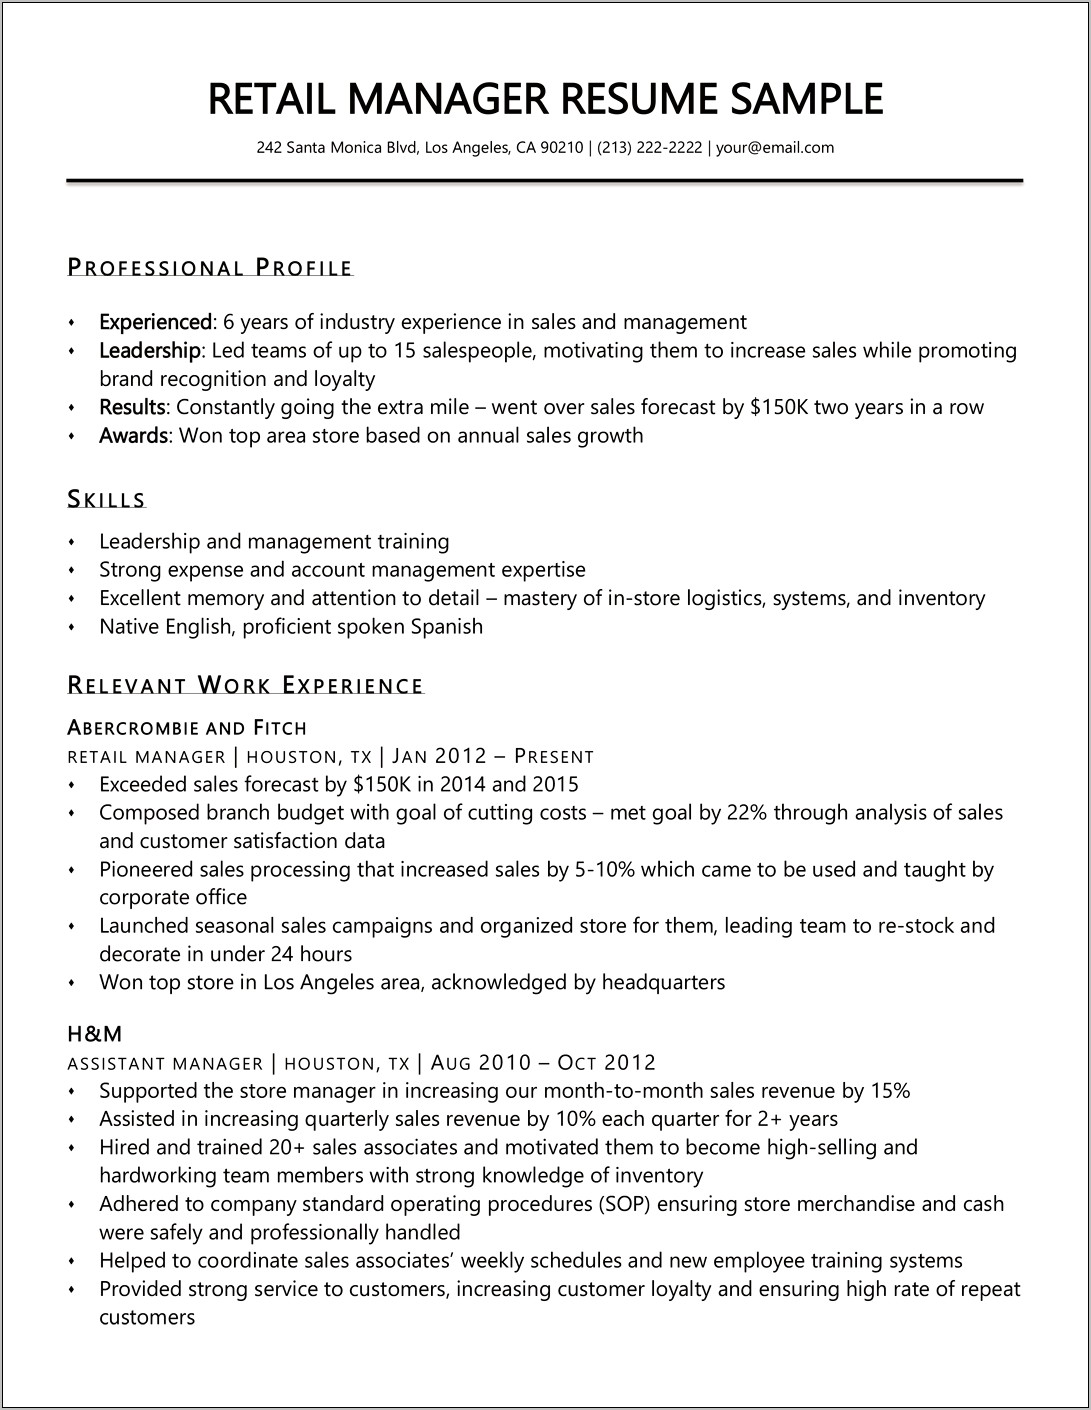 Skill Suggestions For A Resume